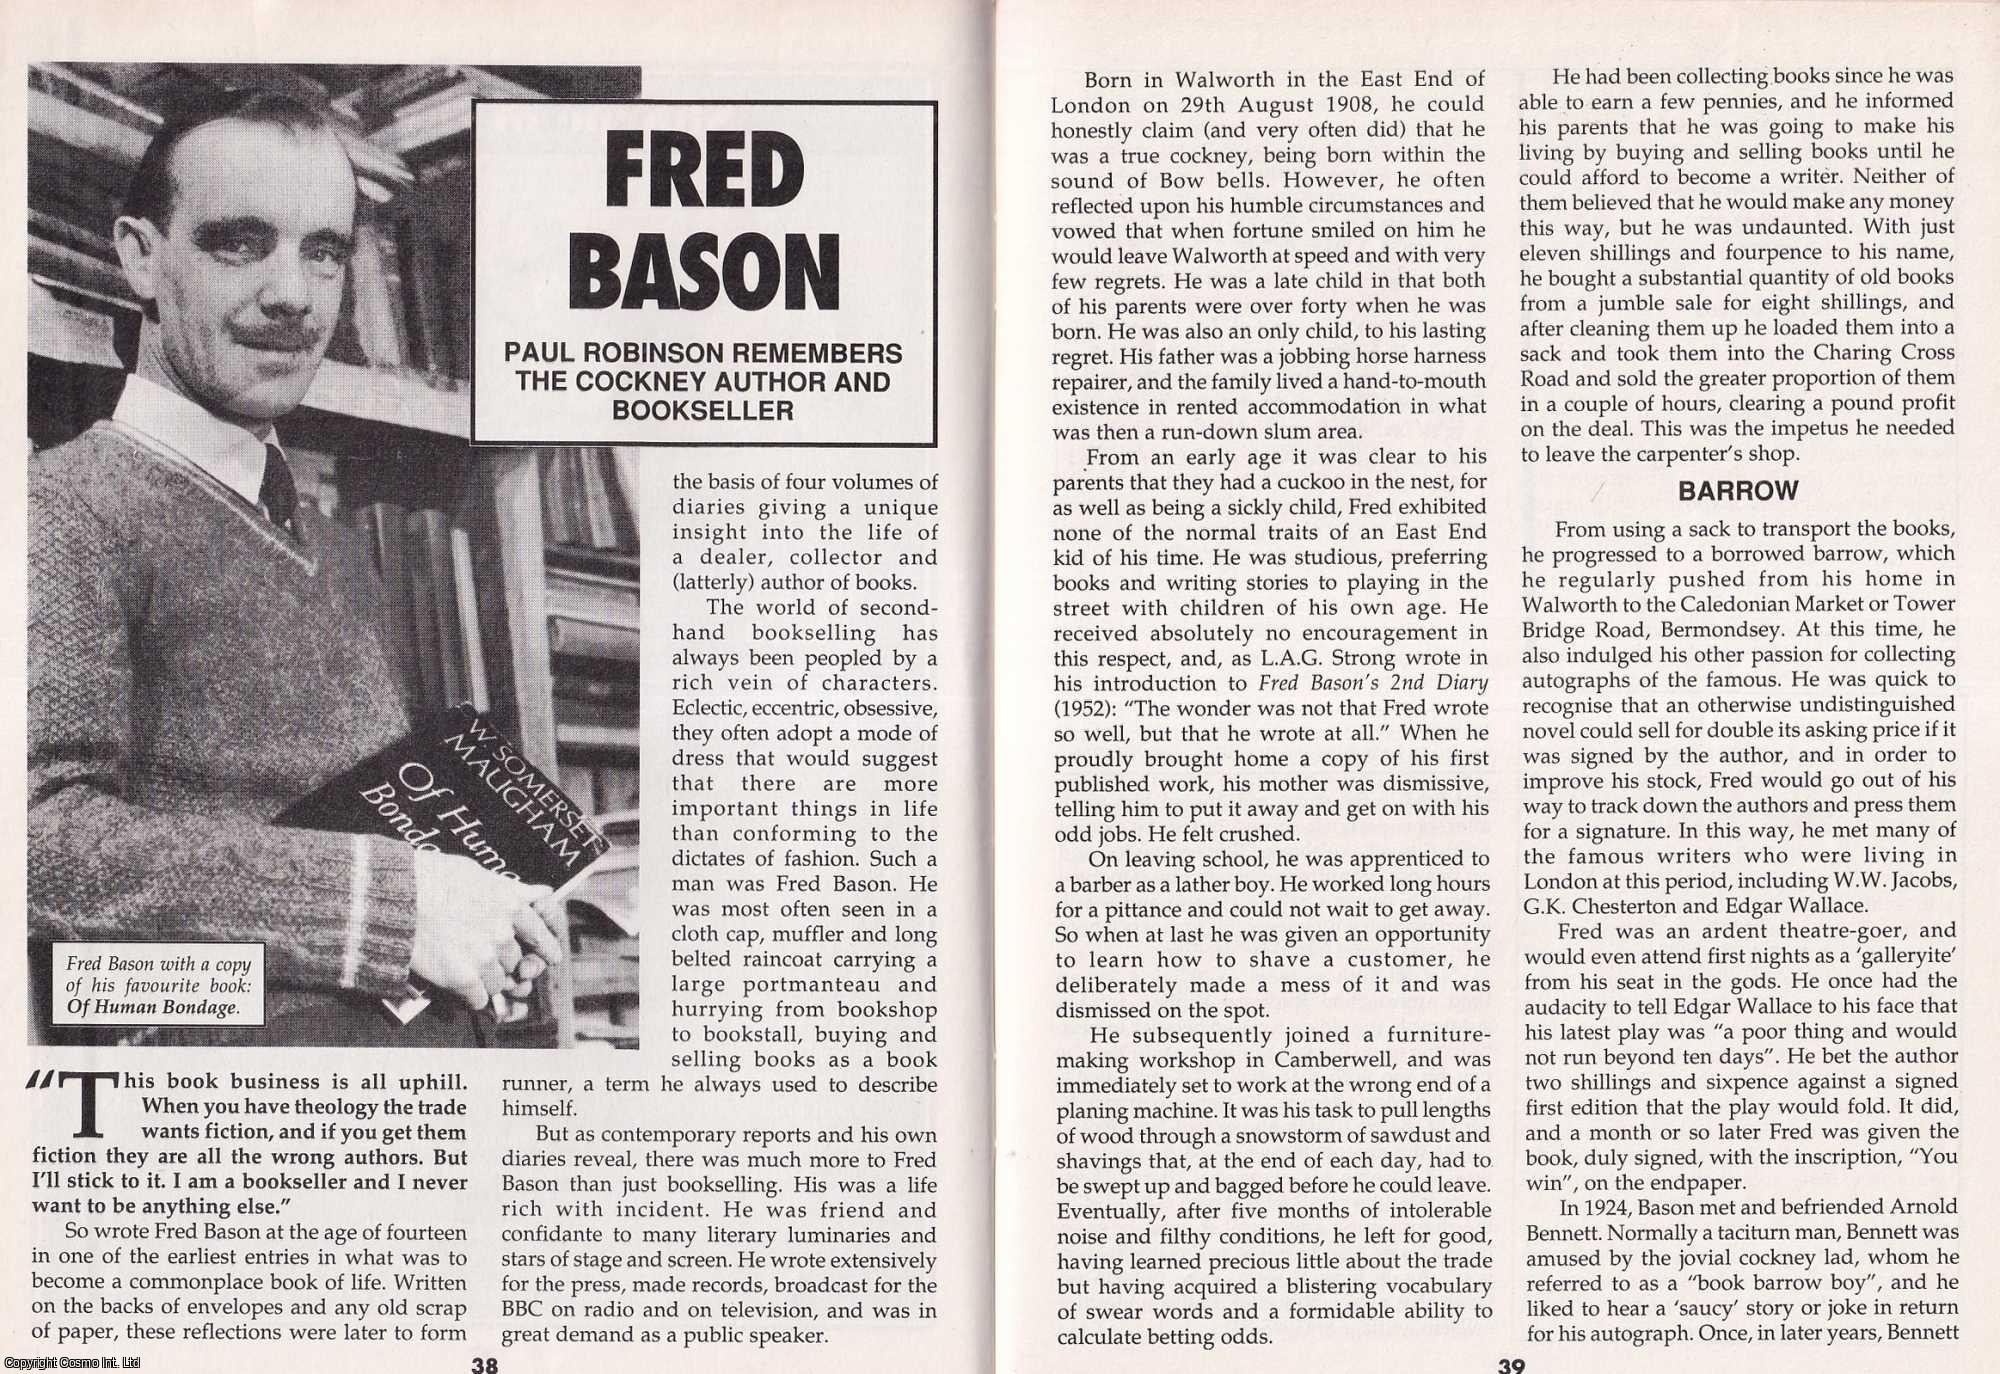 Paul Robinson - Fred Bason : Cockney Author & Bookseller. This is an original article separated from an issue of The Book & Magazine Collector publication.